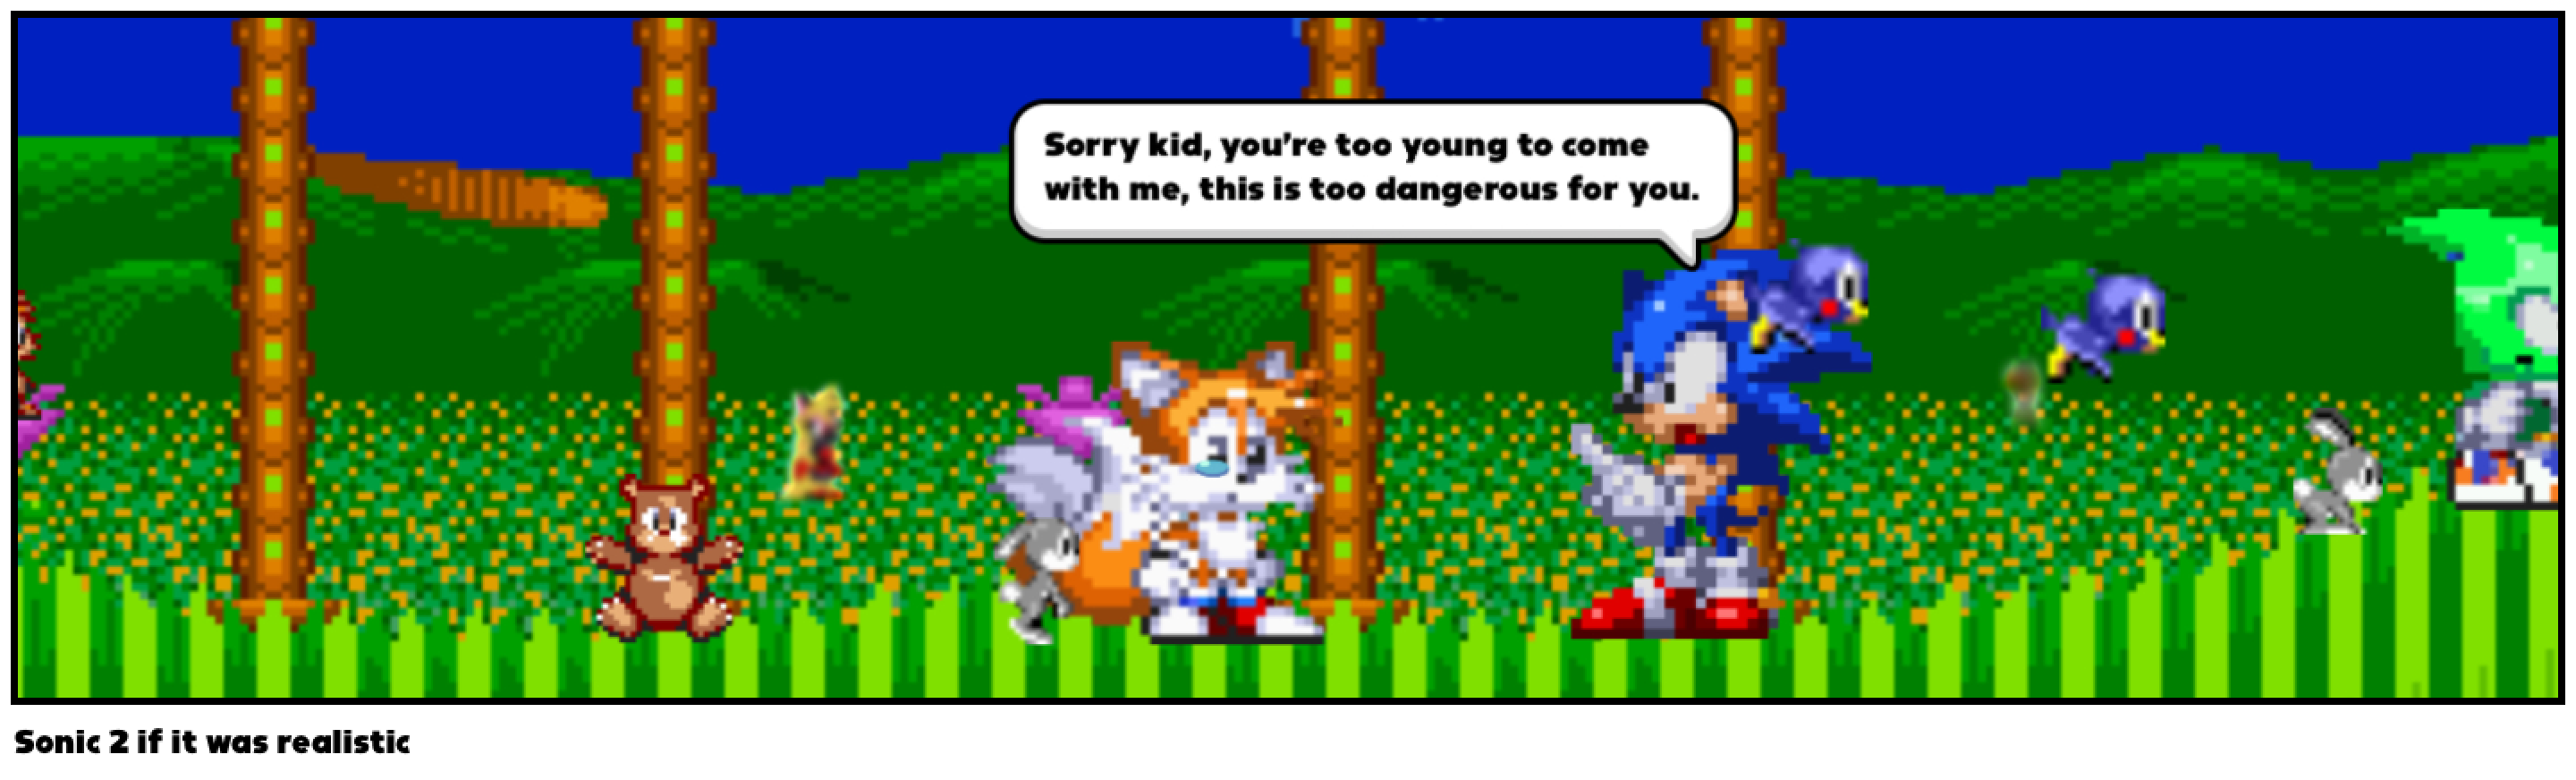 Sonic 2 if it was realistic 